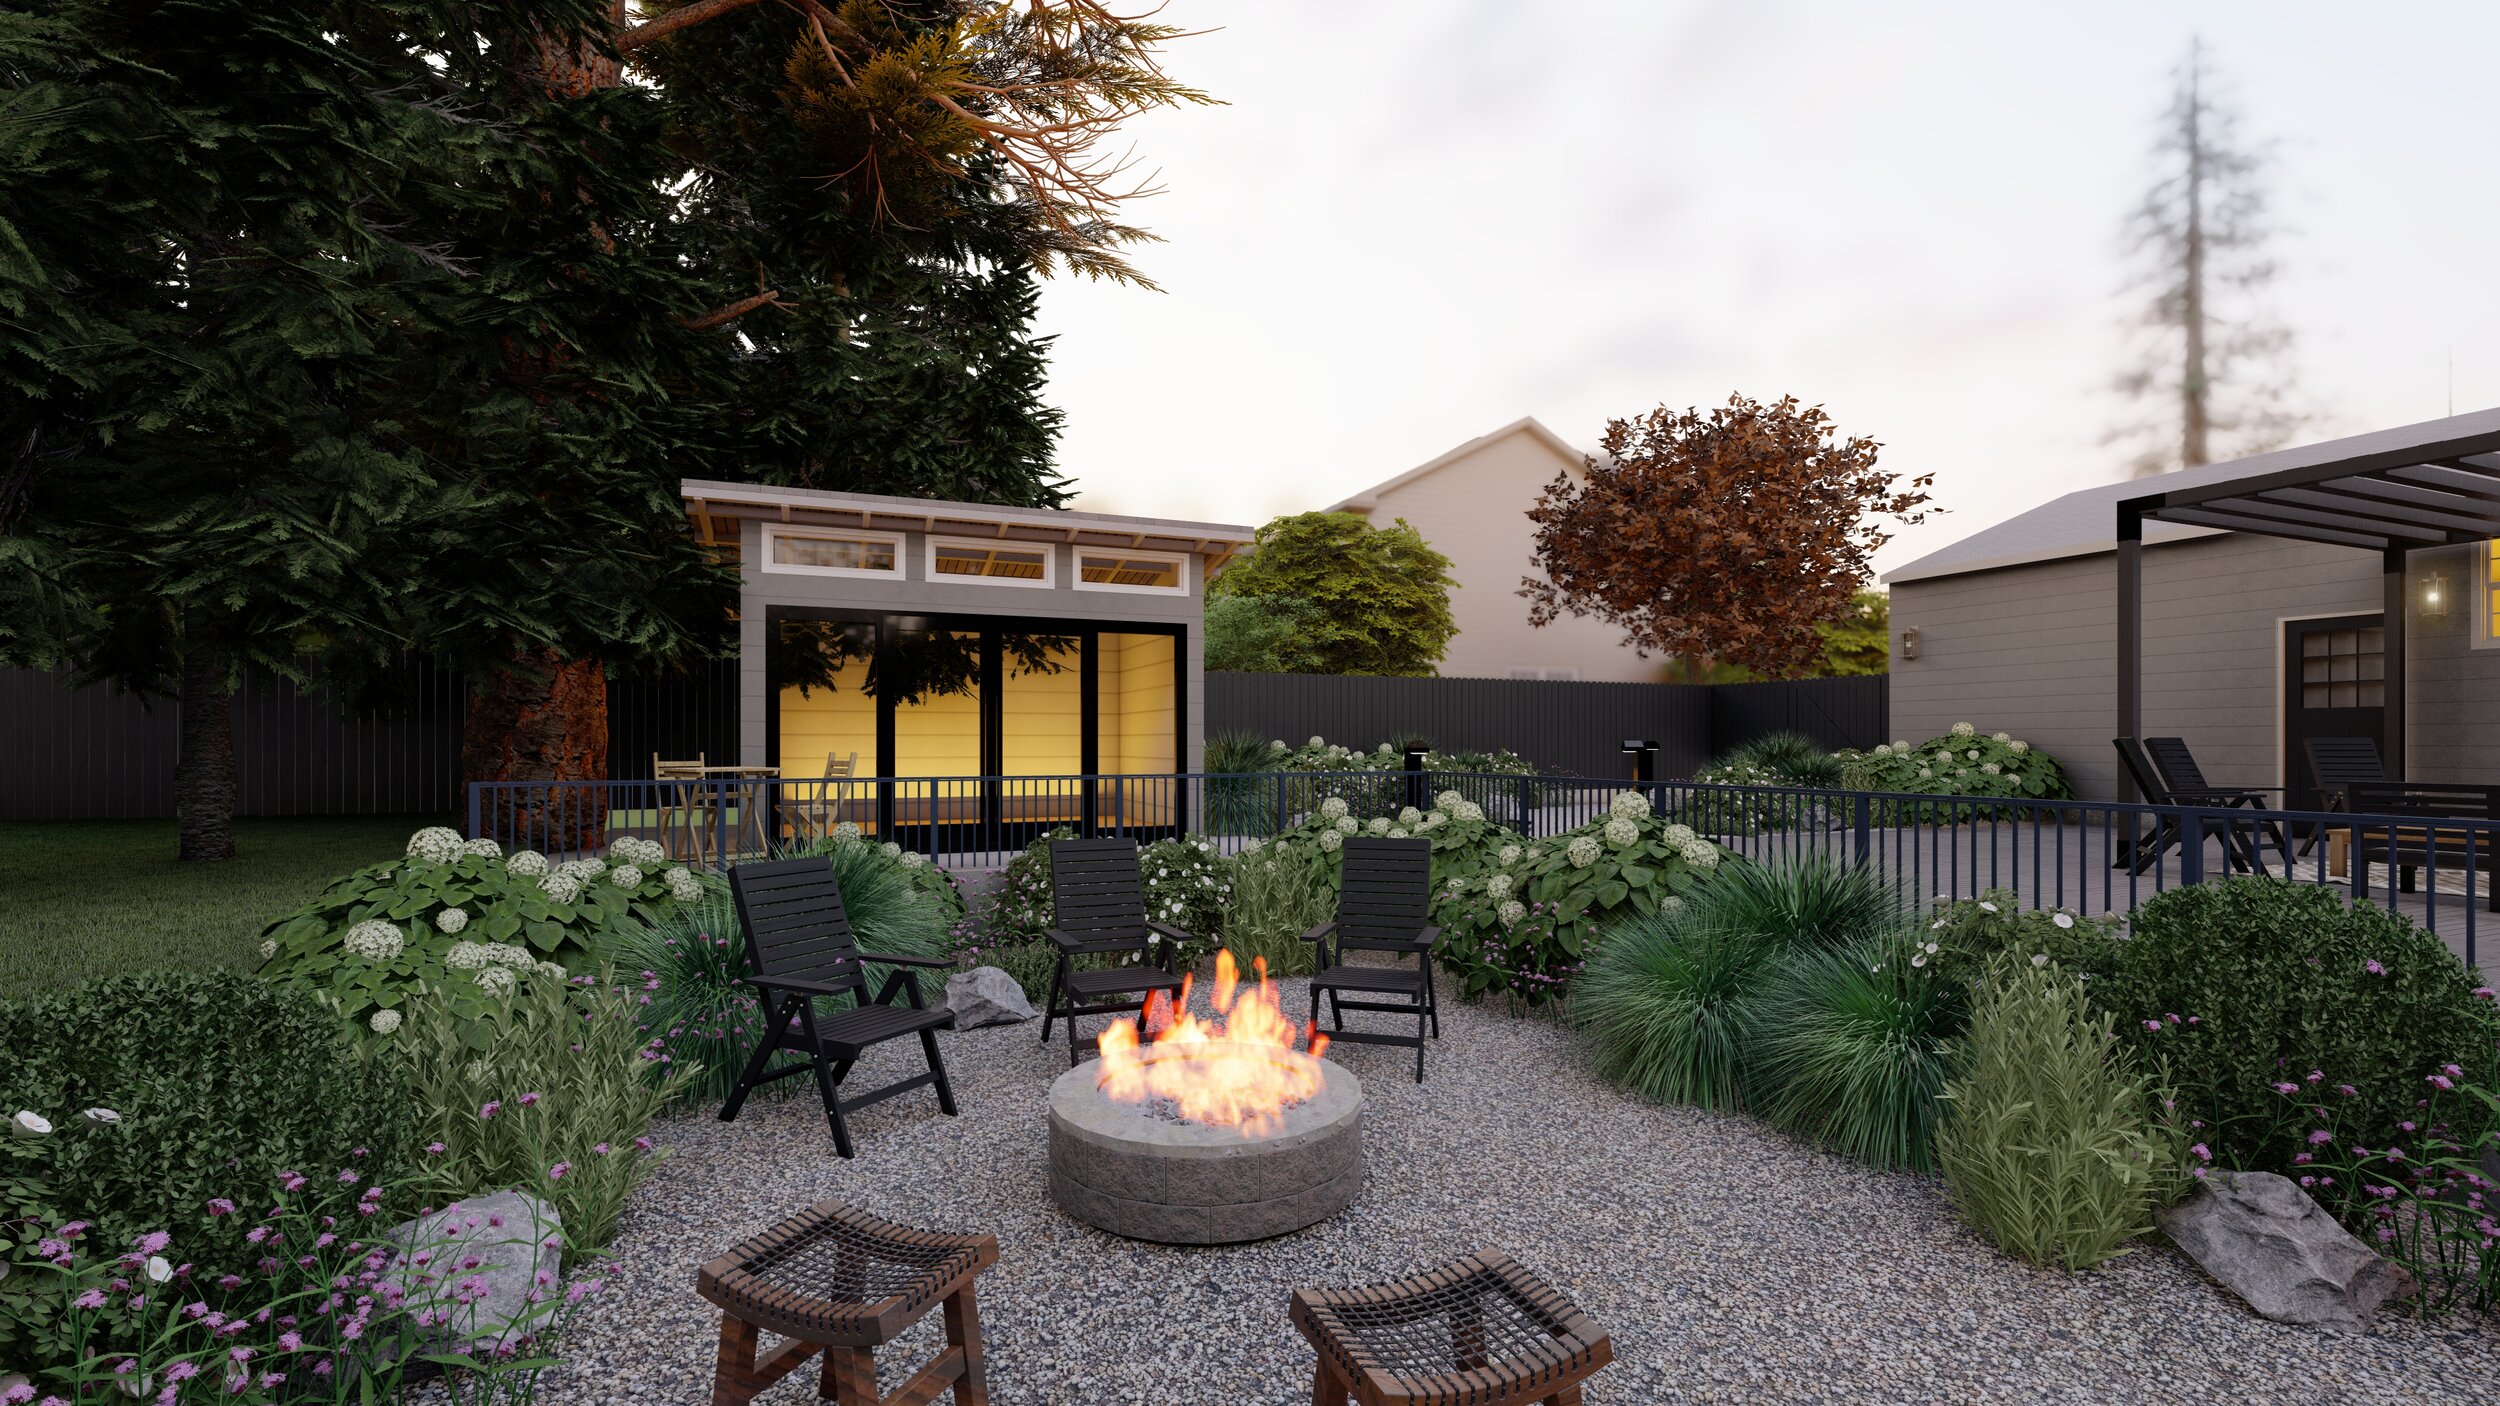 Small backyard with gravel seating area and fire pit next to an ADU